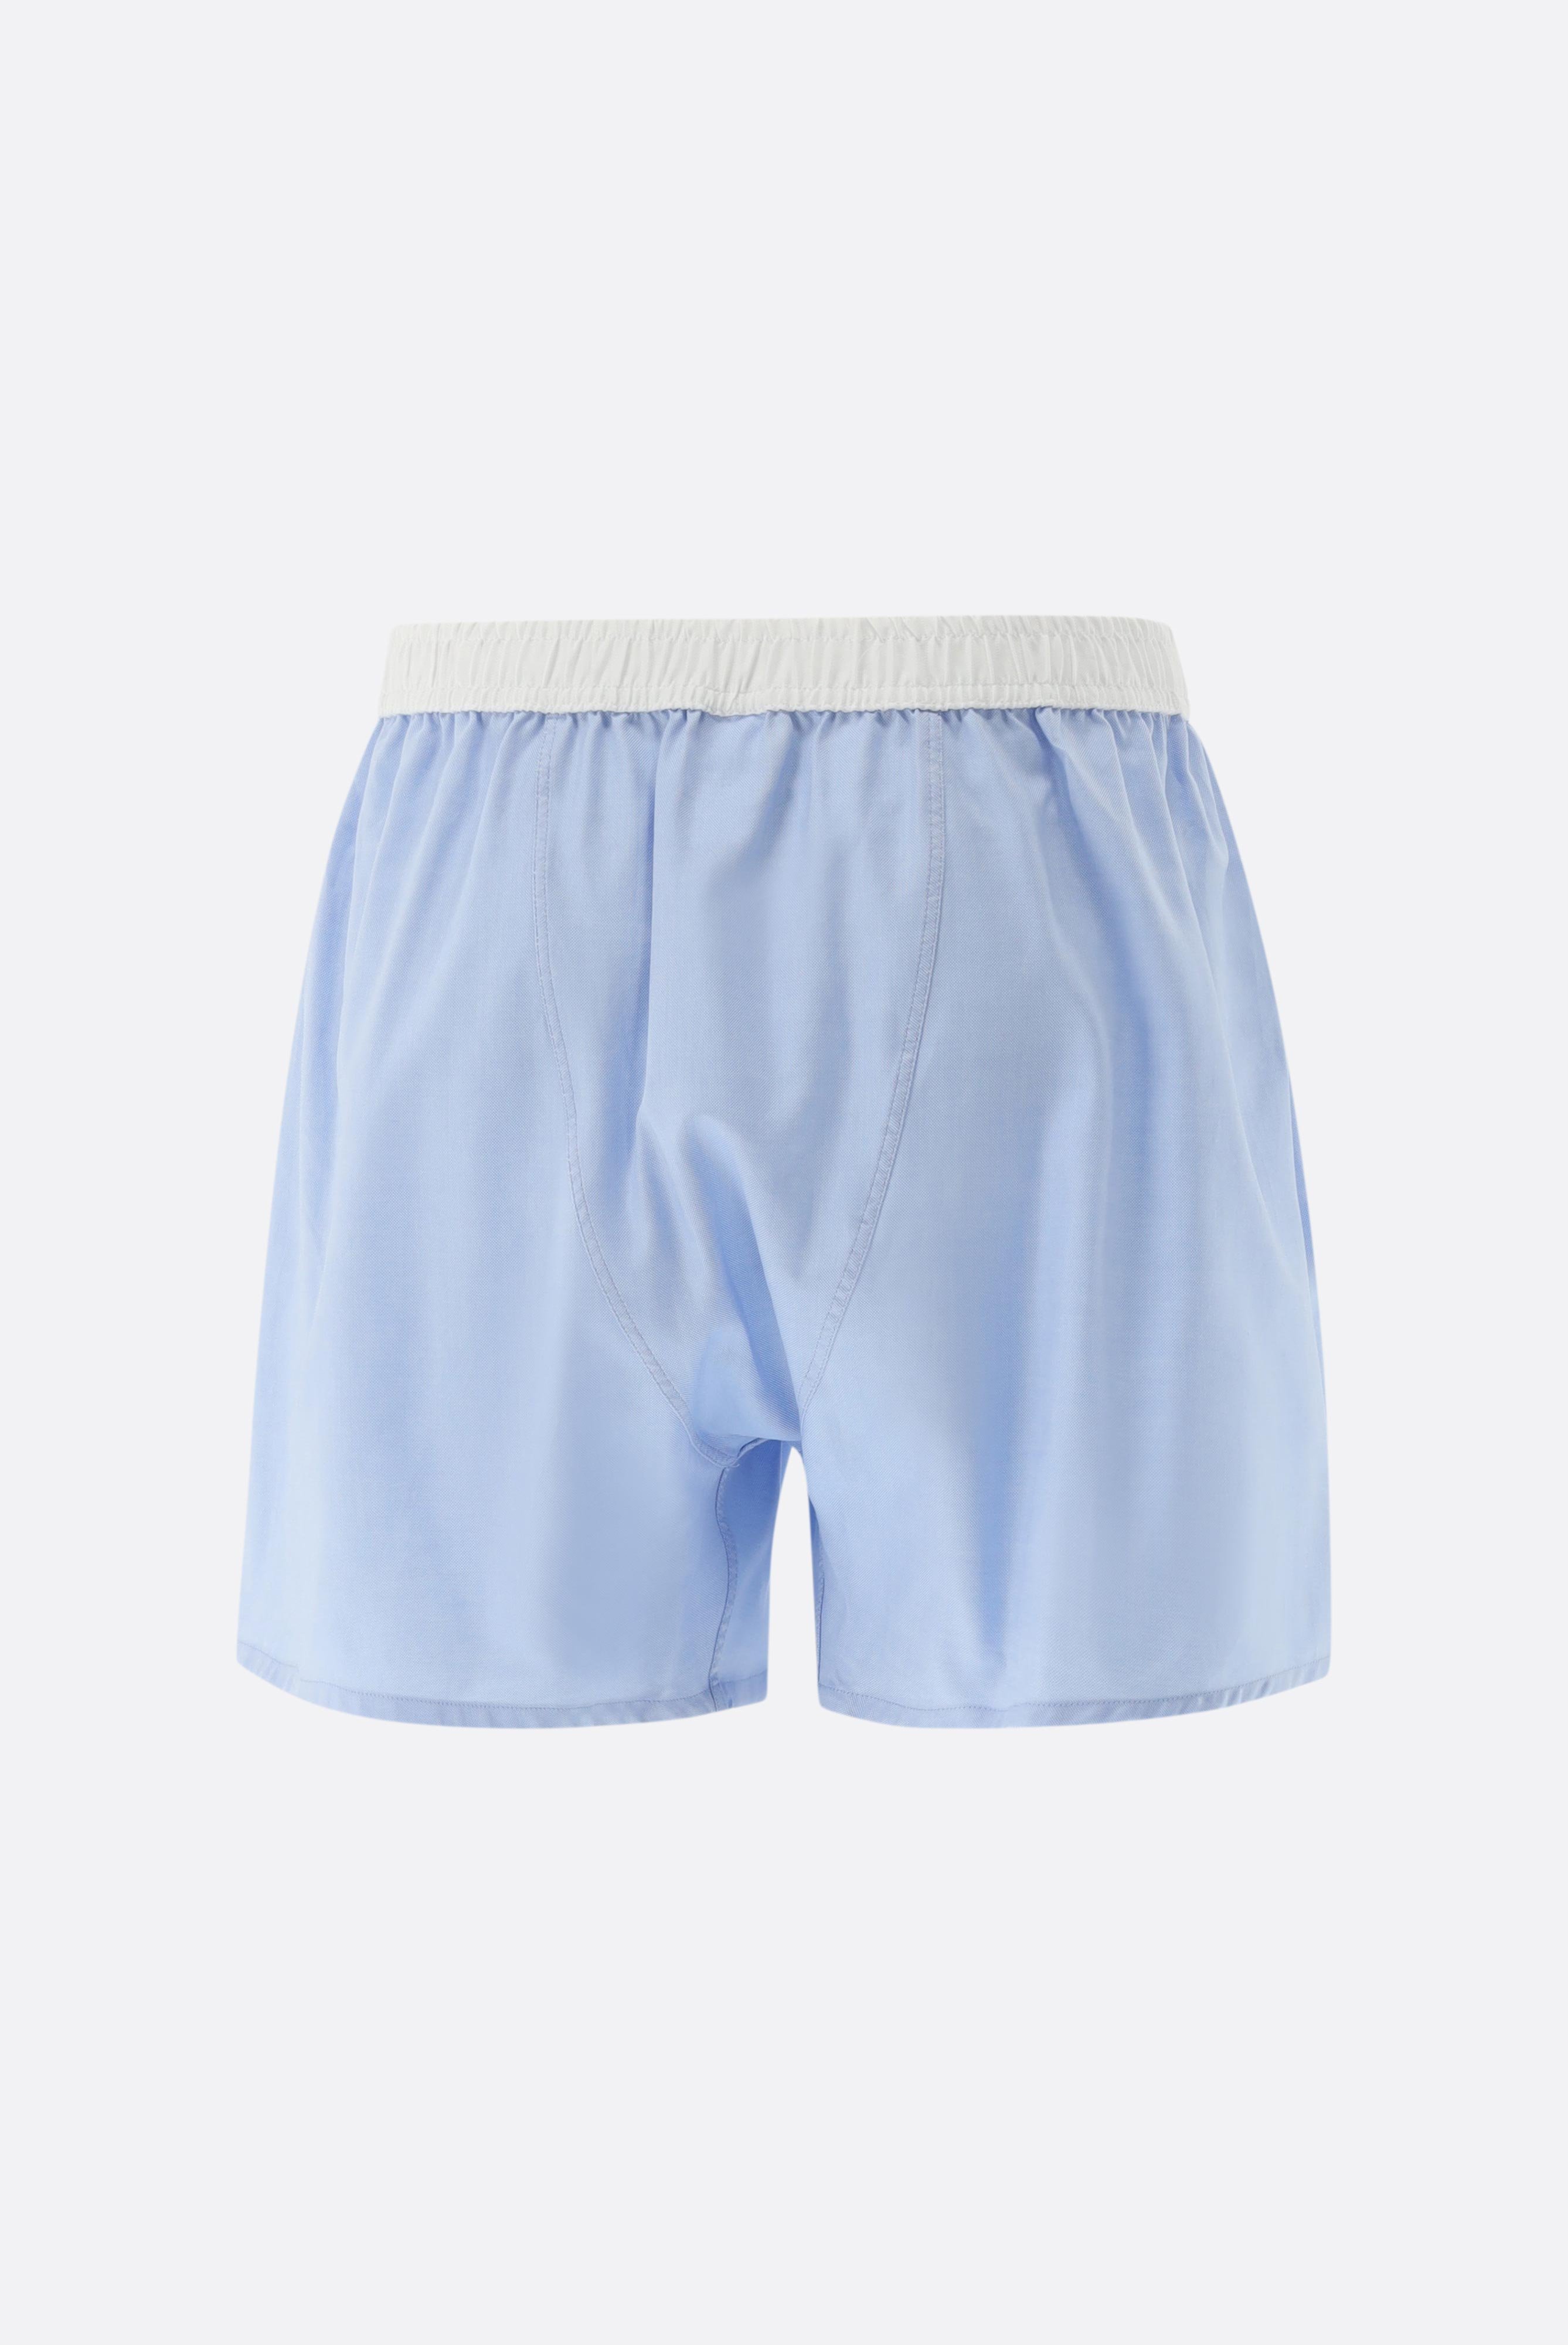 Underwear+Oxford Boxer Shorts with Waistband Contrast+91.1100.V1.150251.730.46